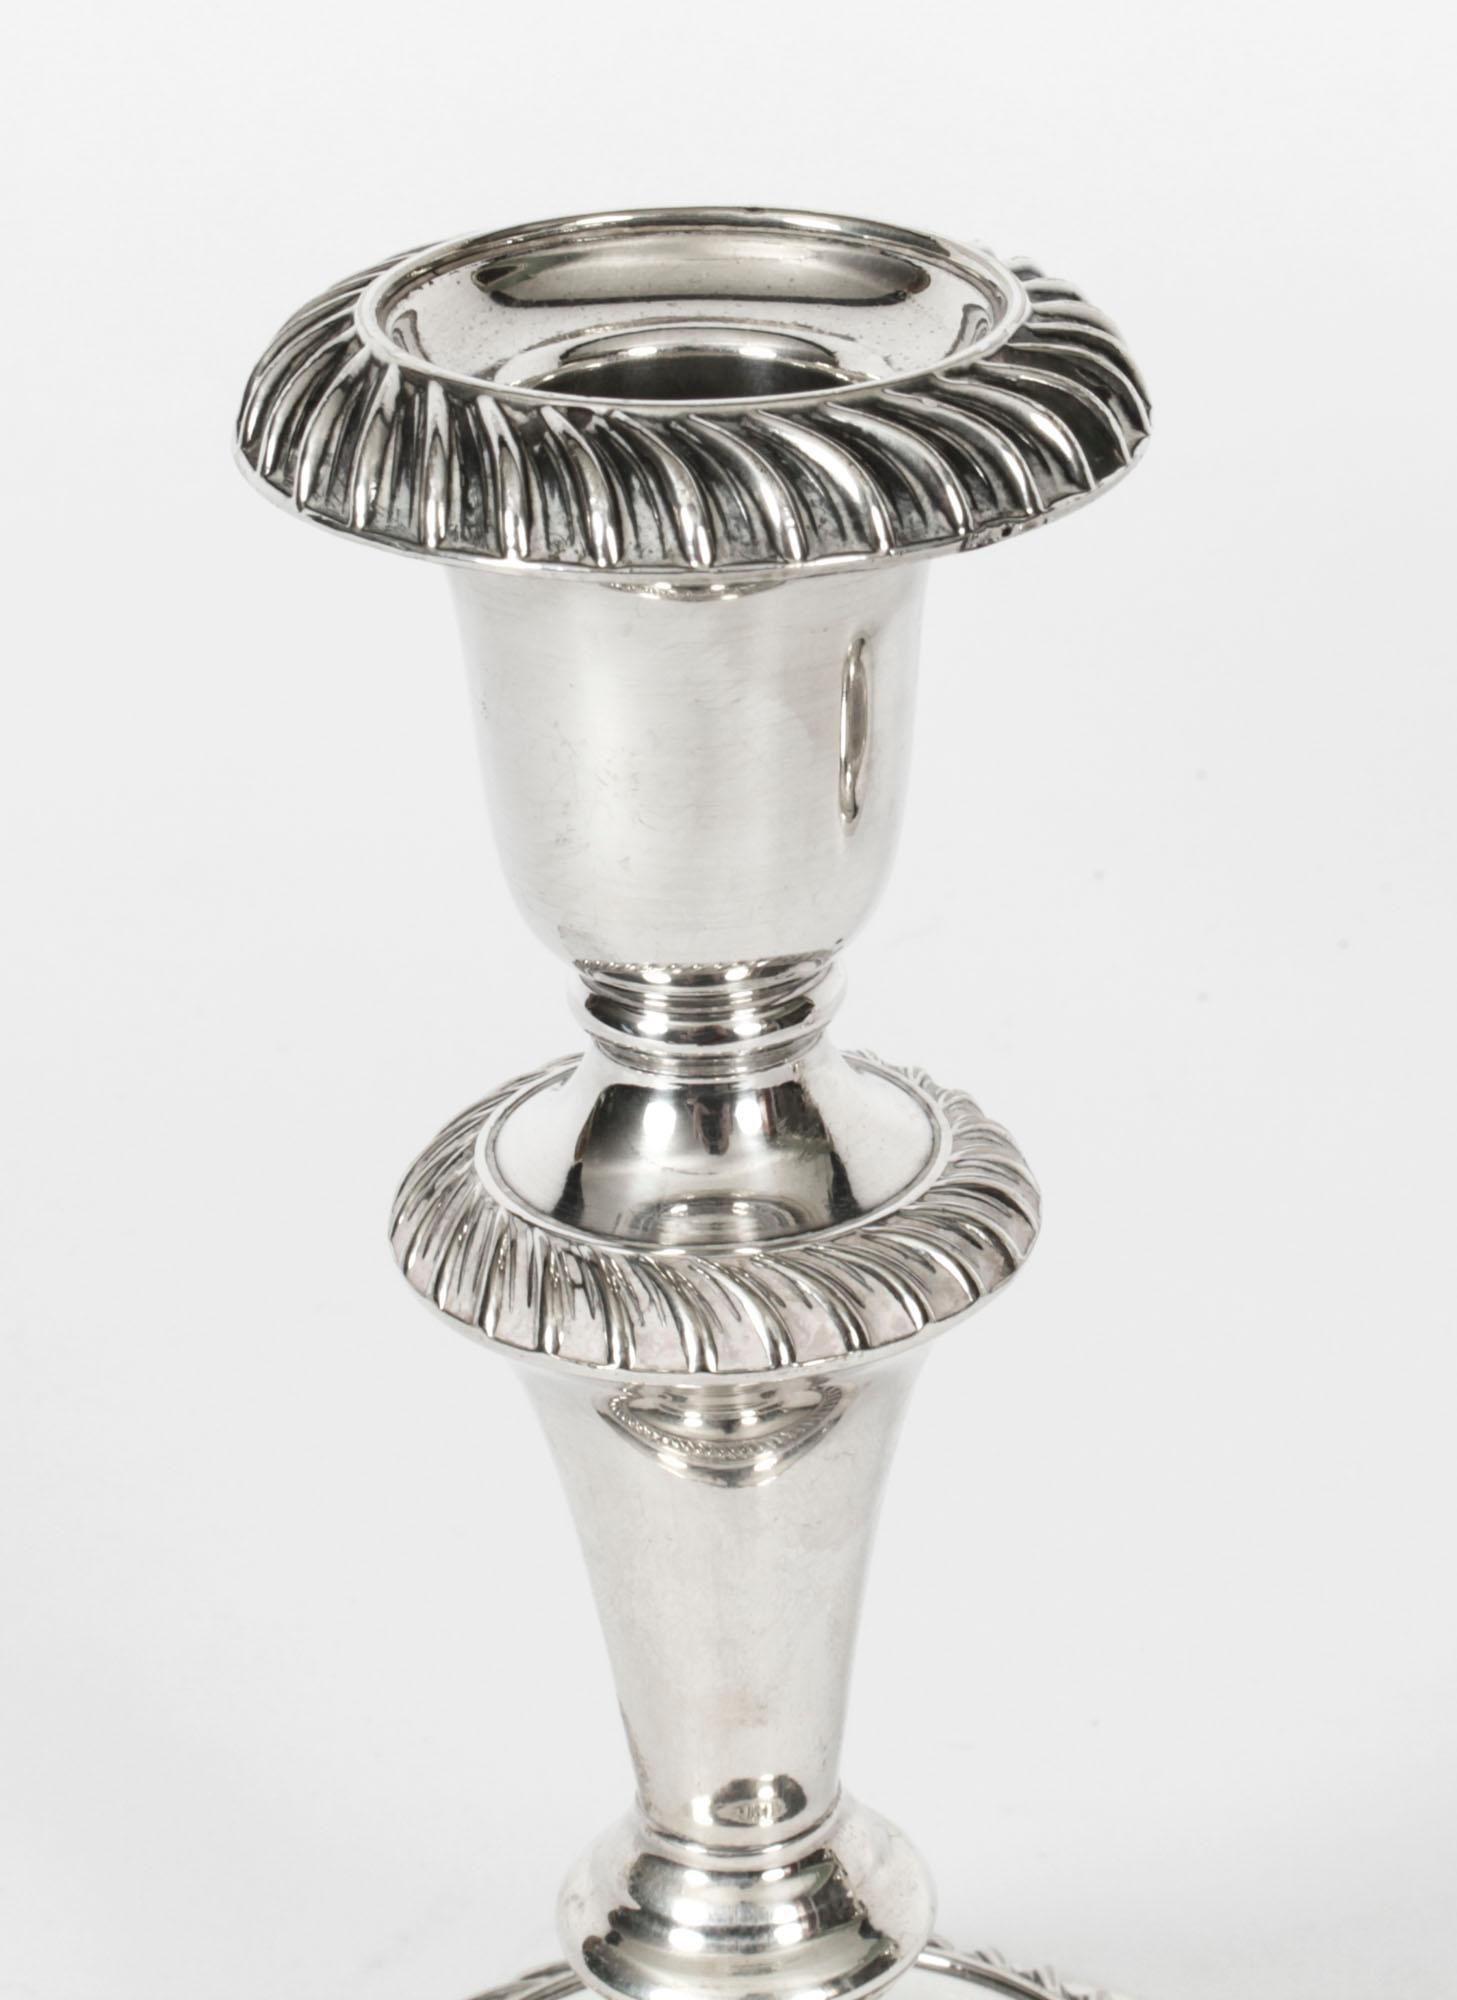 Edwardian Antique Pair Silver Plate Candlesticks by Sydney Latimer, Early 20th Century